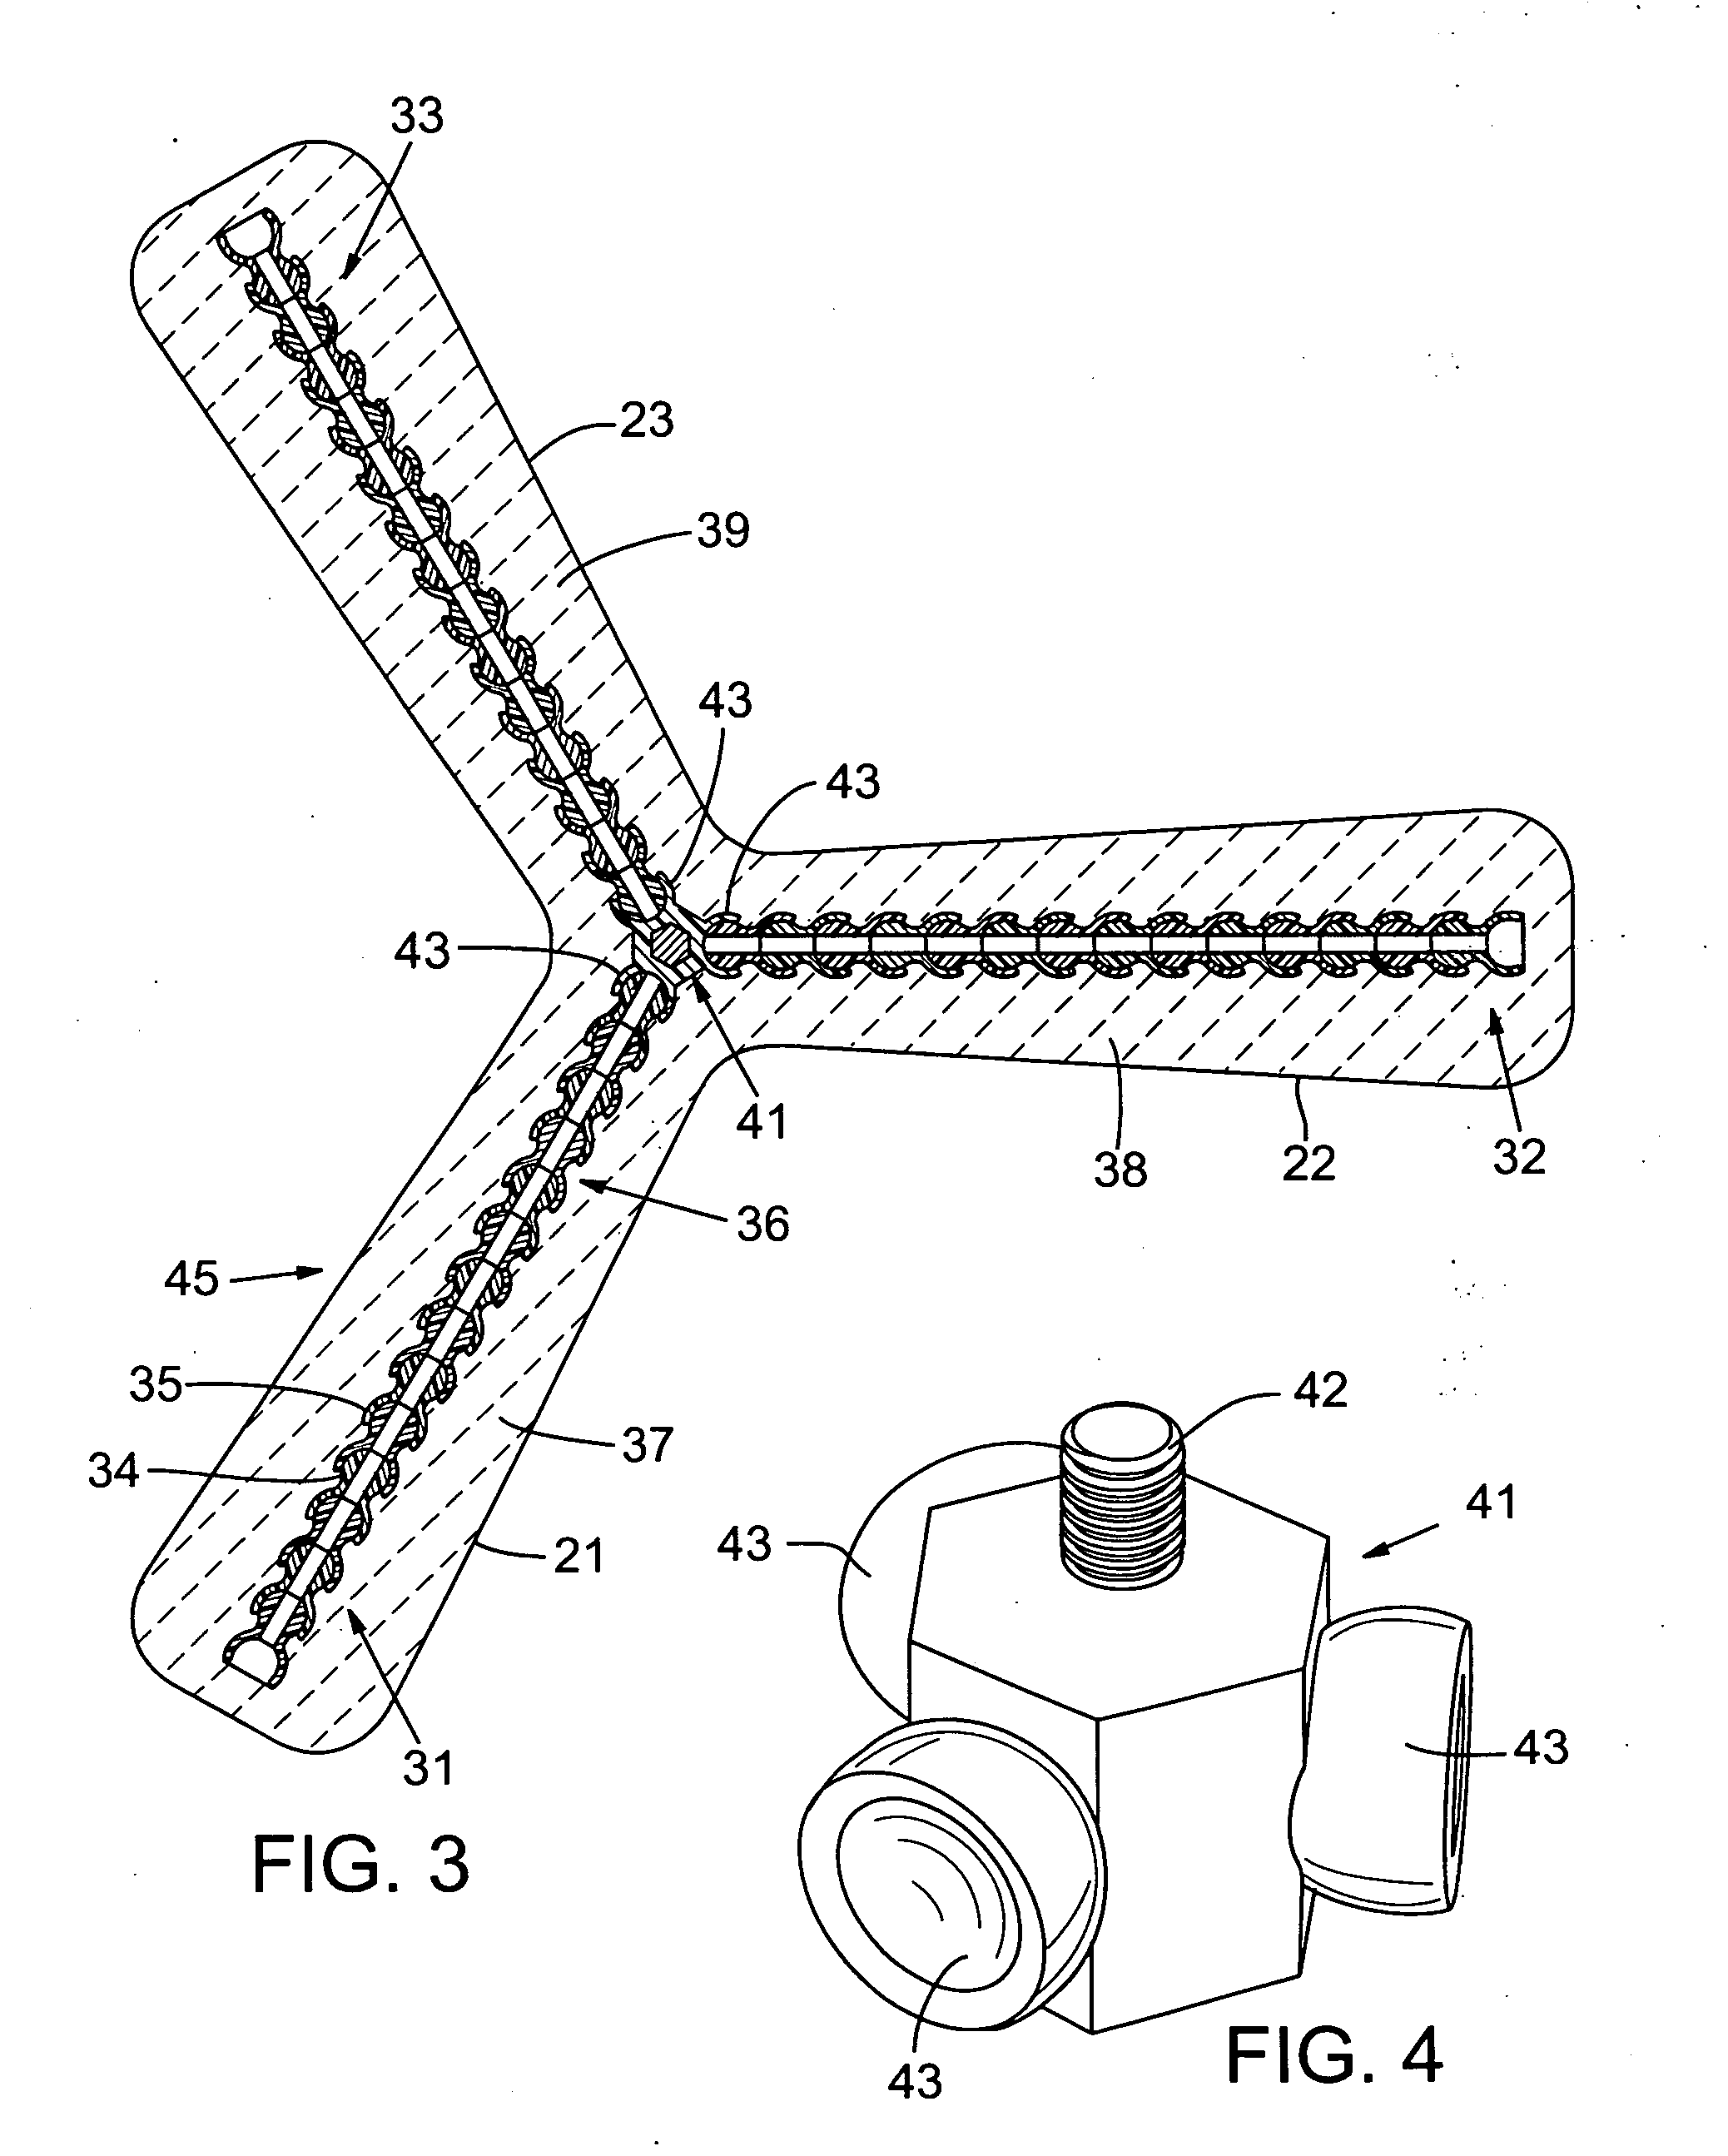 Flexible, positionable and grasping camera or other device mount apparatus